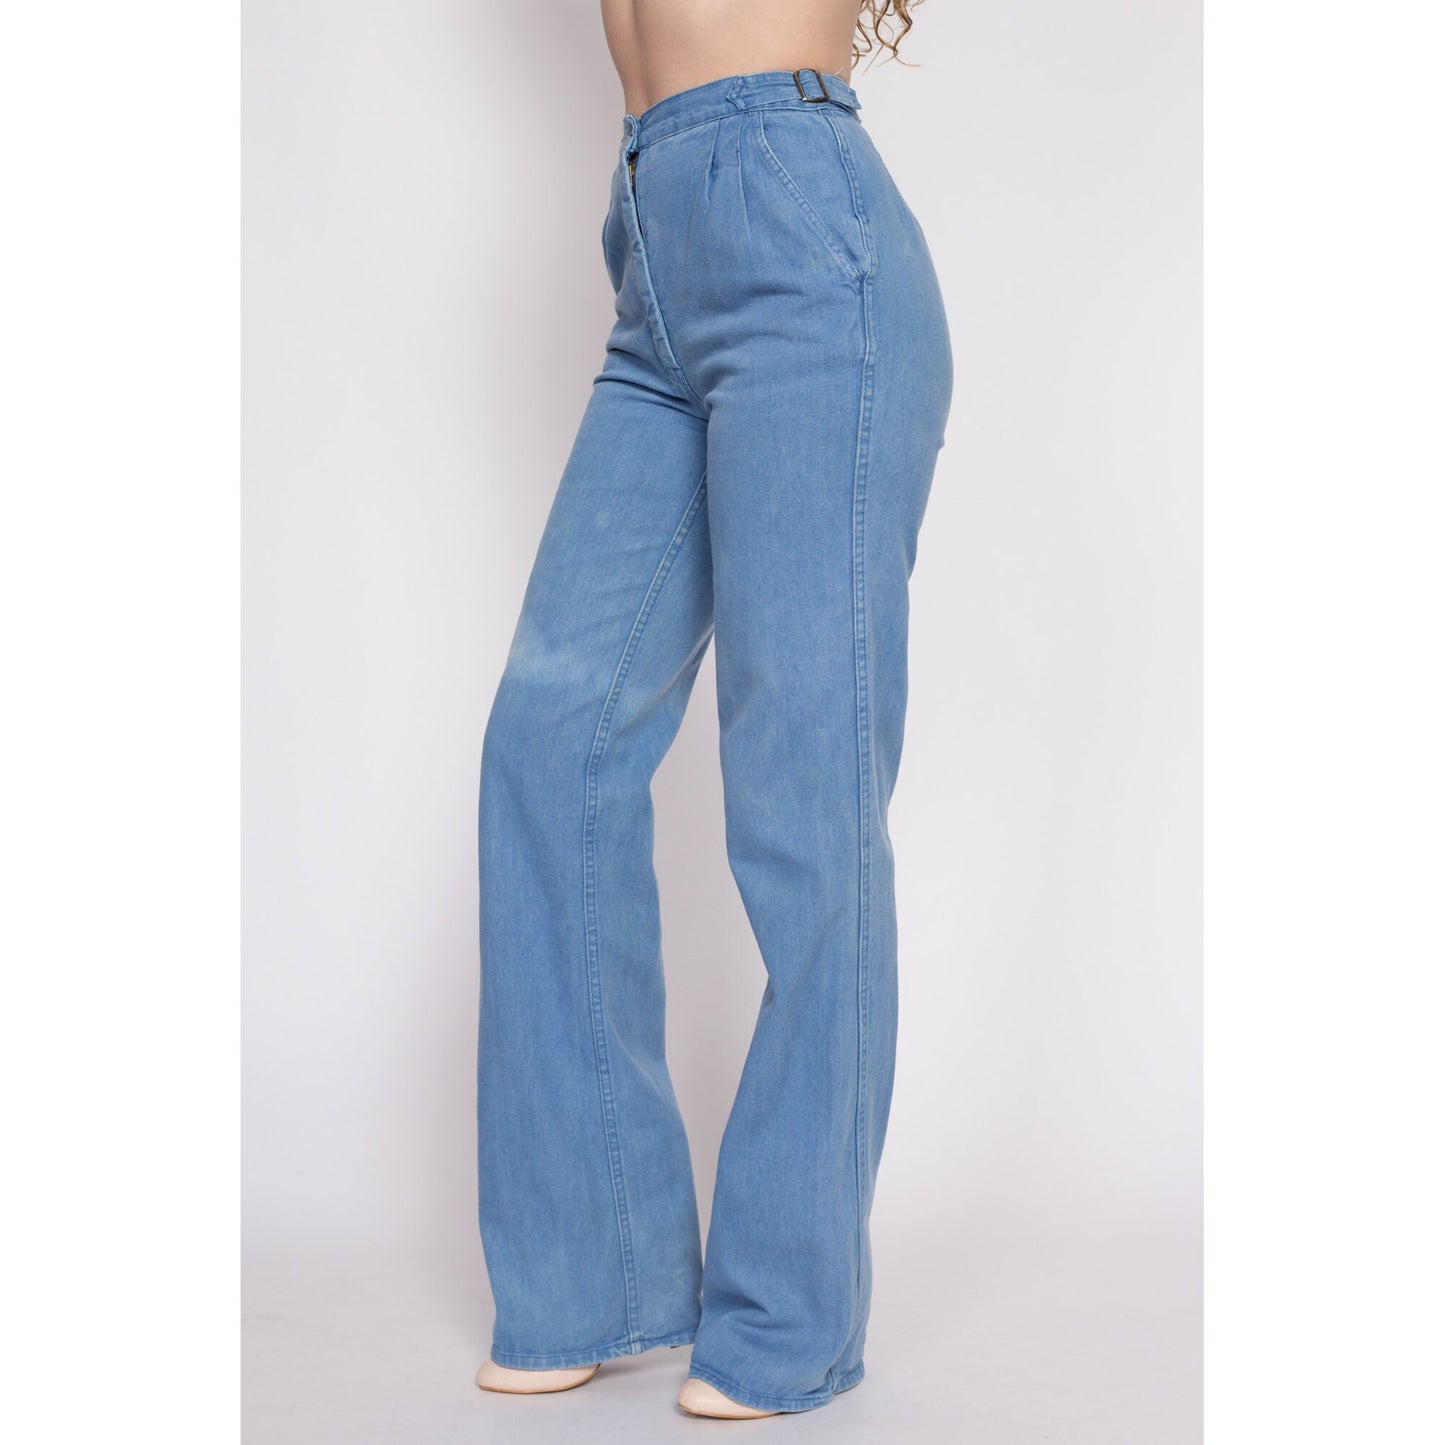 70s 80s Faded Bootcut Jeans - Small | Vintage NY Jeans Pleated Cinched Waist Light Wash High Waisted Jeans